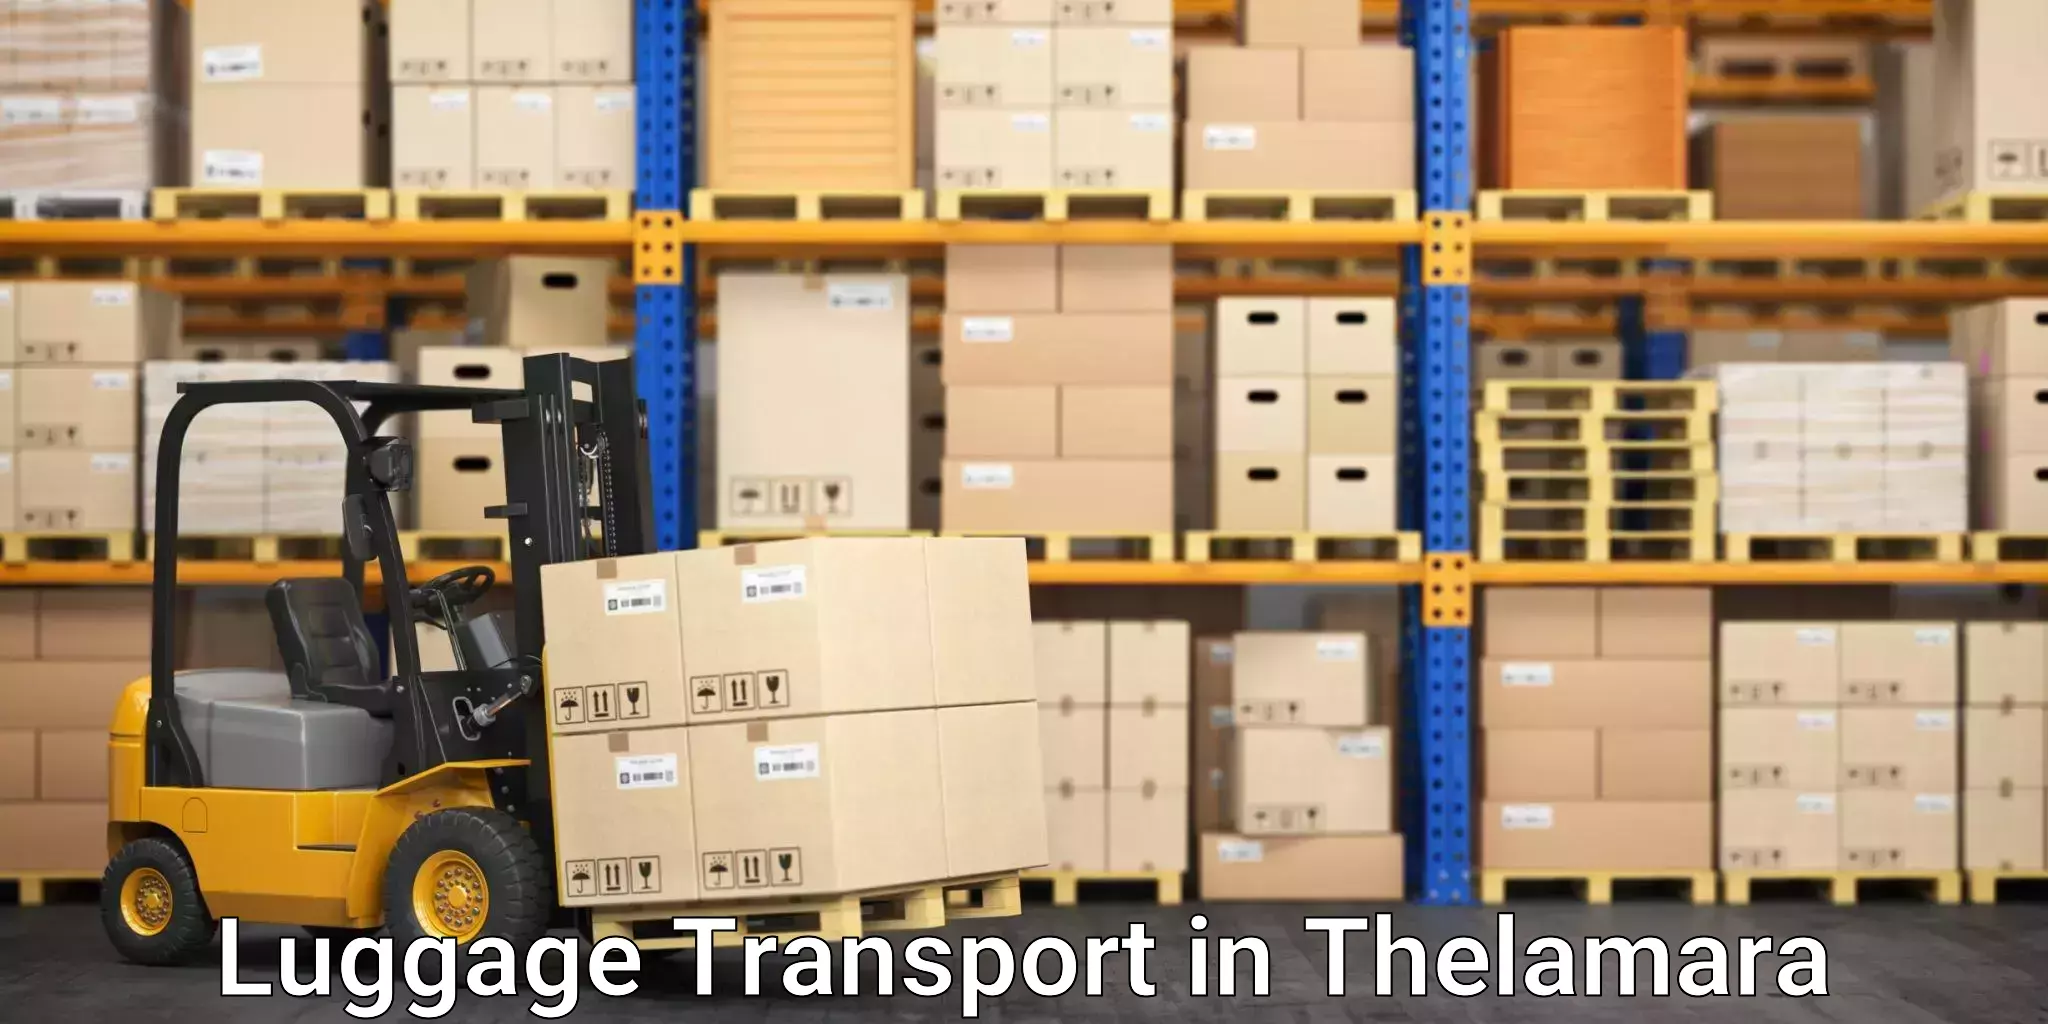 Luggage transport operations in Thelamara